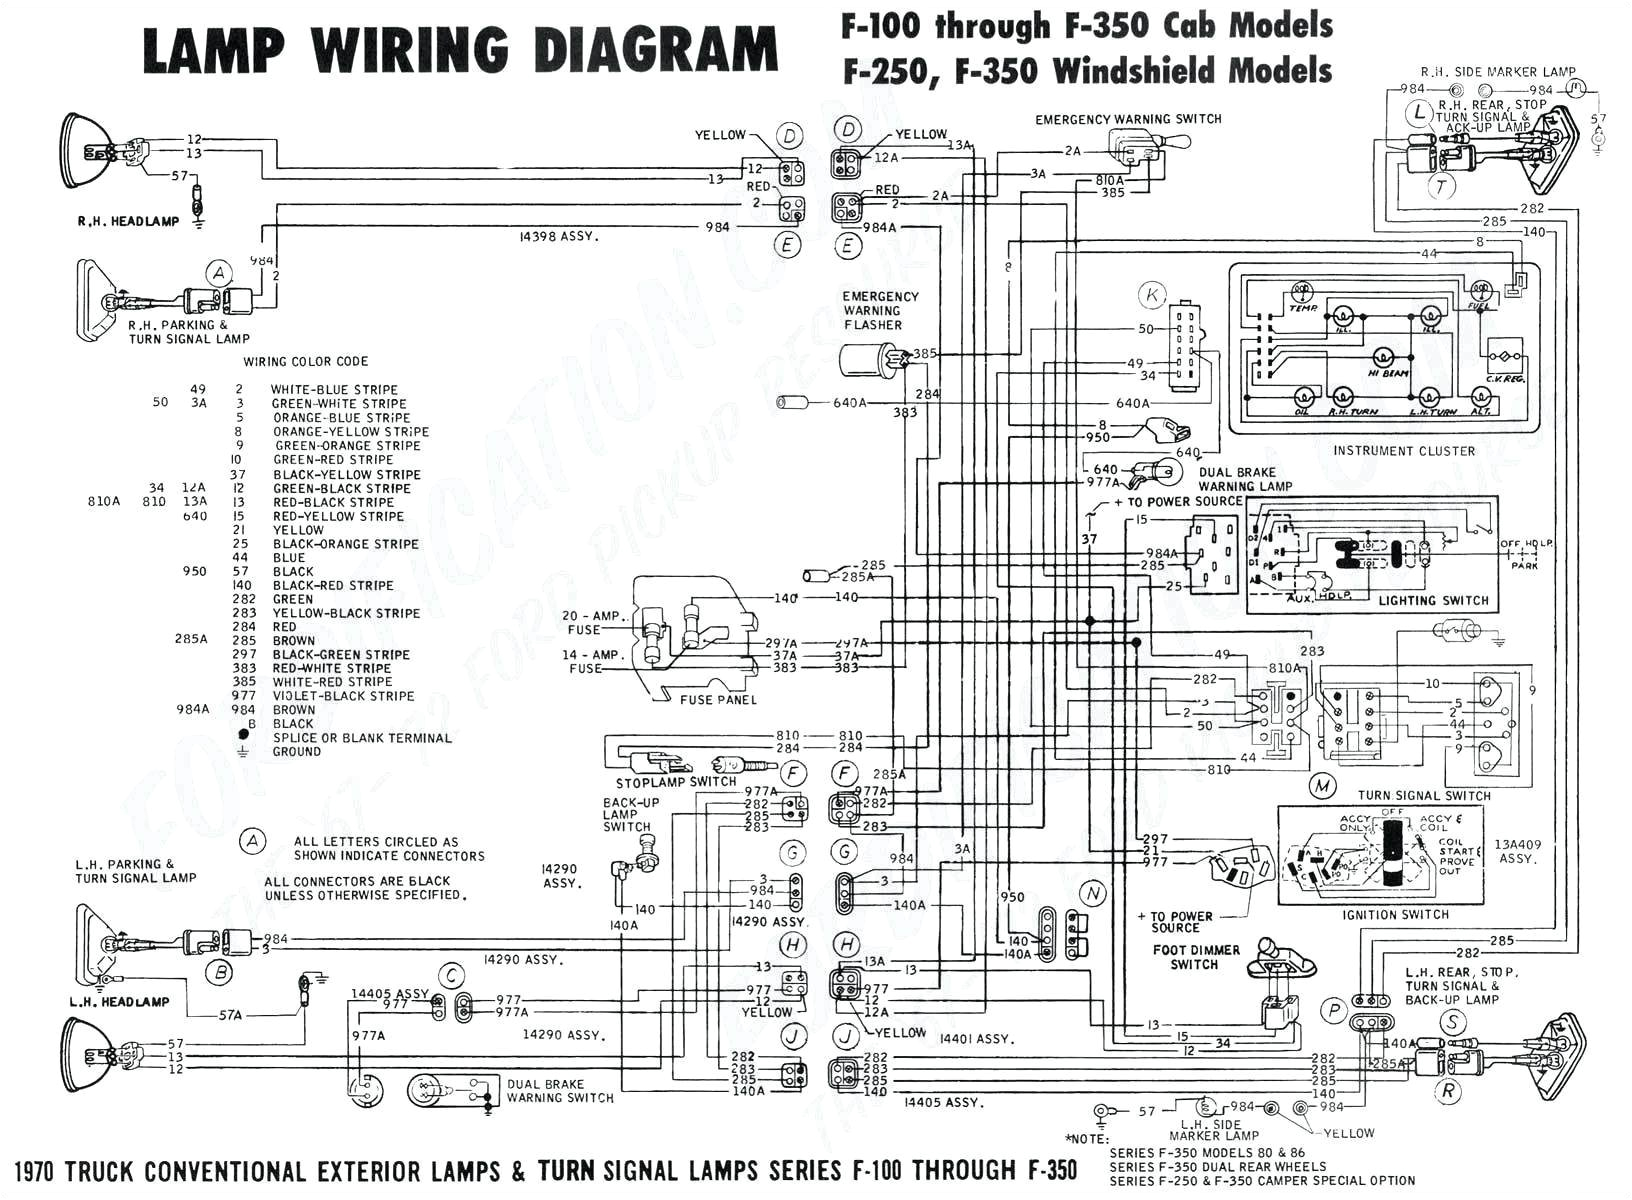 download example honeywell manual thermostat wiring diagram jpg